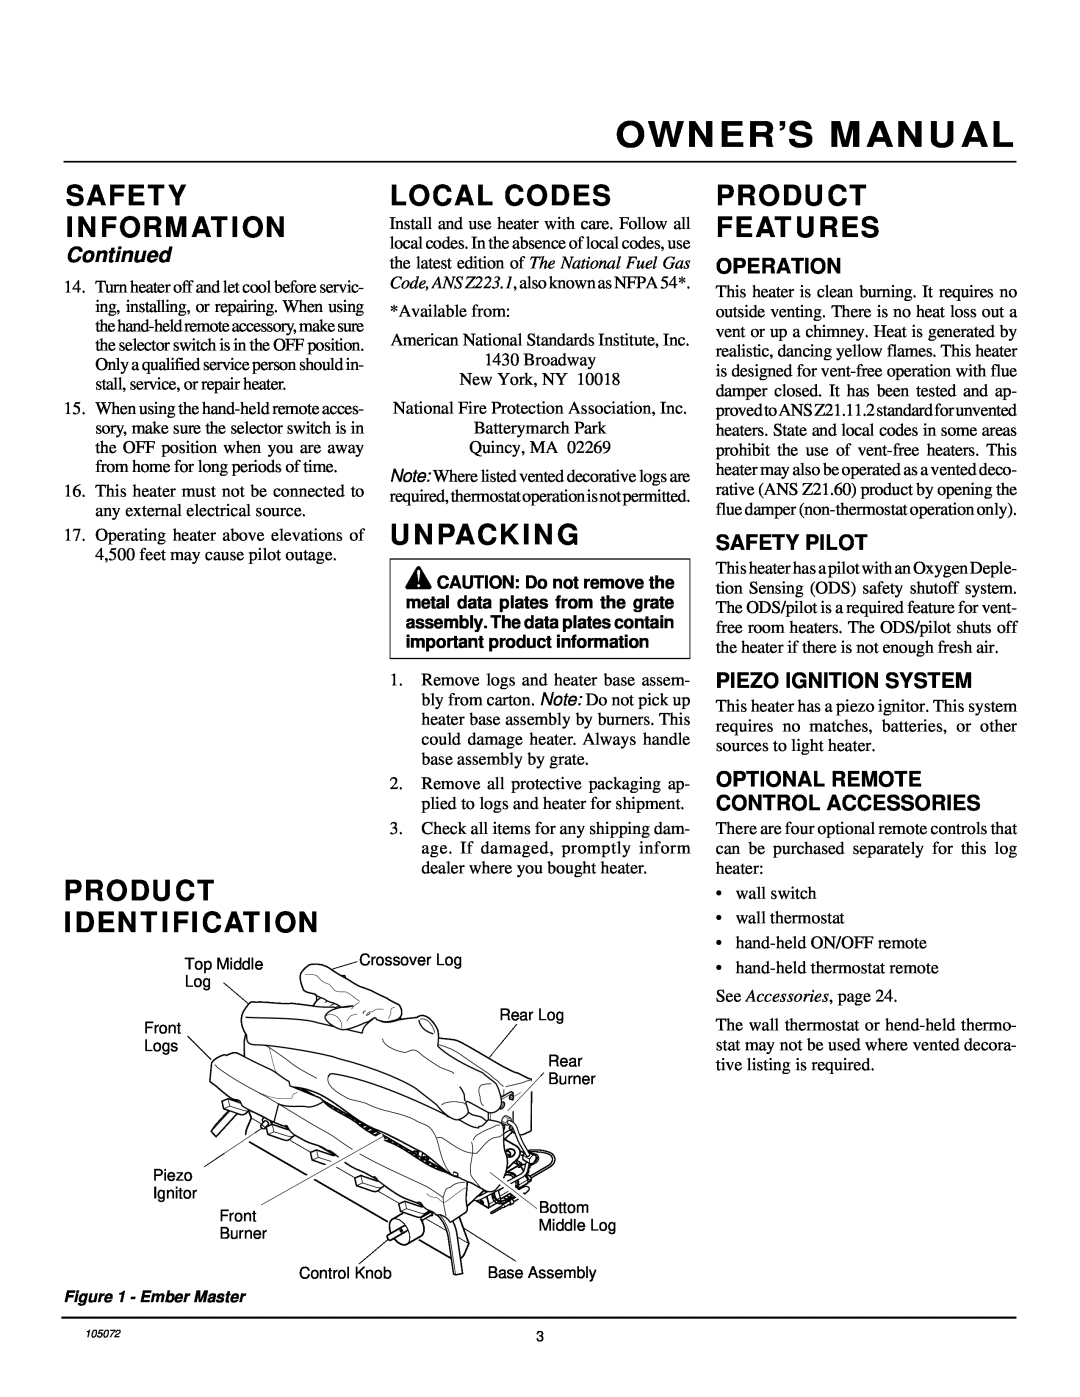 Desa VFN30R, VFN24R, VFN18R Product Identification, Local Codes, Unpacking, Product Features, Continued, Safety Information 